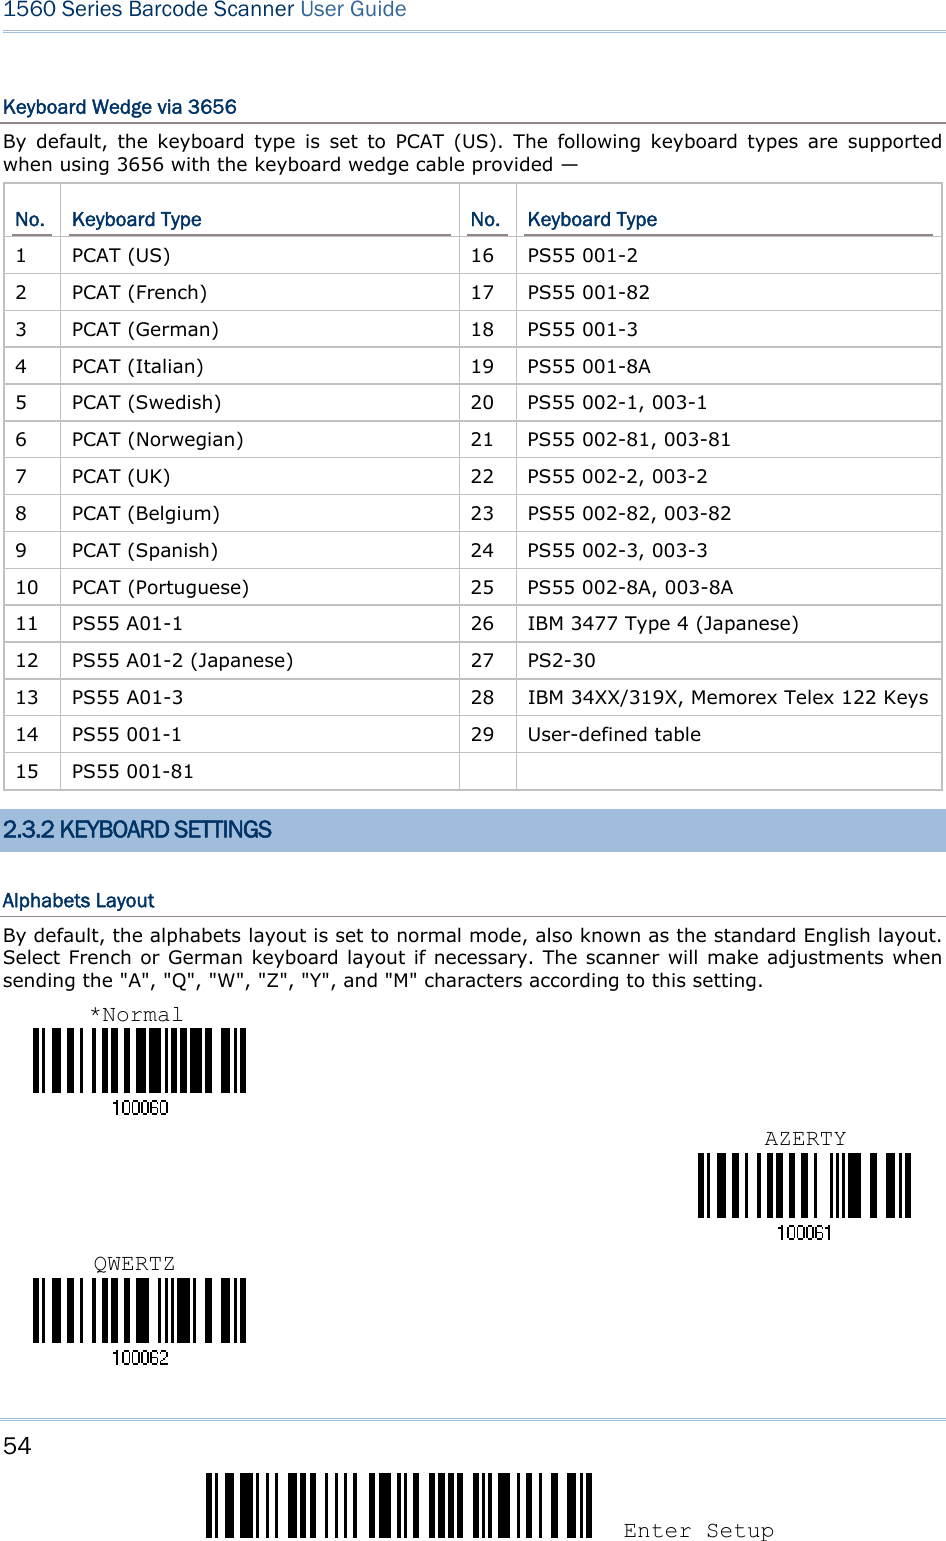 54 Enter Setup 1560 Series Barcode Scanner User Guide  Keyboard Wedge via 3656 By default, the keyboard type is set to PCAT (US). The following keyboard types are supported when using 3656 with the keyboard wedge cable provided — No.  Keyboard Type  No. Keyboard Type 1  PCAT (US)  16  PS55 001-2 2  PCAT (French)  17  PS55 001-82 3  PCAT (German)  18  PS55 001-3 4  PCAT (Italian)  19  PS55 001-8A 5  PCAT (Swedish)  20  PS55 002-1, 003-1 6  PCAT (Norwegian)  21  PS55 002-81, 003-81 7  PCAT (UK)  22  PS55 002-2, 003-2 8  PCAT (Belgium)  23  PS55 002-82, 003-82 9  PCAT (Spanish)  24  PS55 002-3, 003-3 10  PCAT (Portuguese)  25  PS55 002-8A, 003-8A 11  PS55 A01-1  26  IBM 3477 Type 4 (Japanese) 12  PS55 A01-2 (Japanese)  27  PS2-30 13  PS55 A01-3  28  IBM 34XX/319X, Memorex Telex 122 Keys 14 PS55 001-1  29 User-defined table 15 PS55 001-81      2.3.2 KEYBOARD SETTINGS Alphabets Layout By default, the alphabets layout is set to normal mode, also known as the standard English layout. Select French or German keyboard layout if necessary. The scanner will make adjustments when sending the &quot;A&quot;, &quot;Q&quot;, &quot;W&quot;, &quot;Z&quot;, &quot;Y&quot;, and &quot;M&quot; characters according to this setting.   *Normal AZERTY QWERTZ 